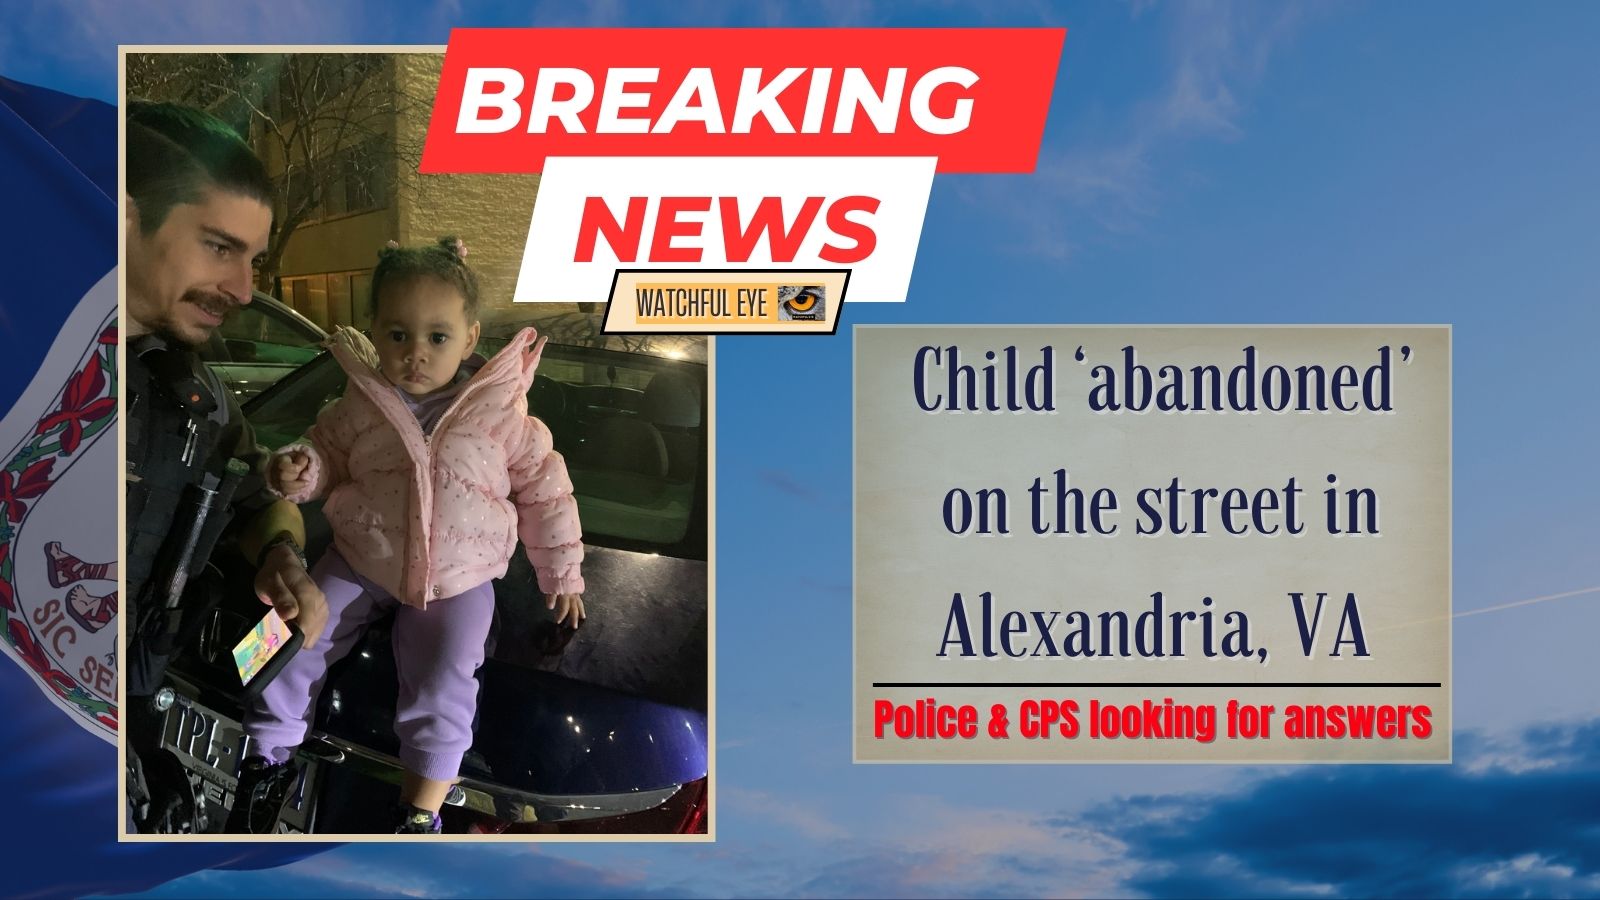 Alexandria police asking for tips on abandoned baby